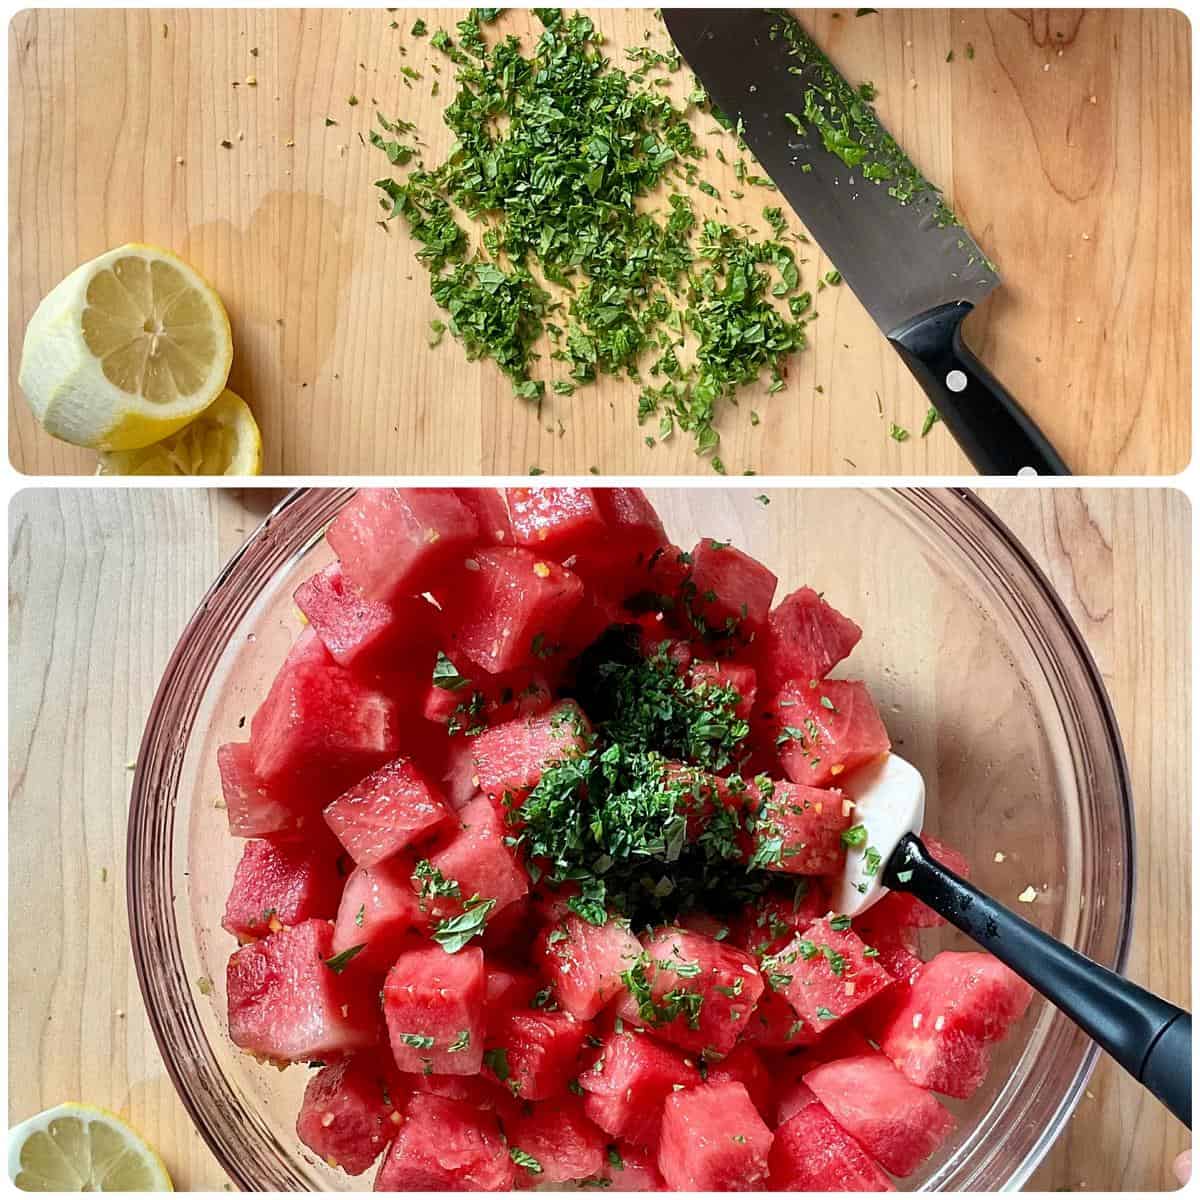 Minced fresh mint leaves being added to a watermelon salad.